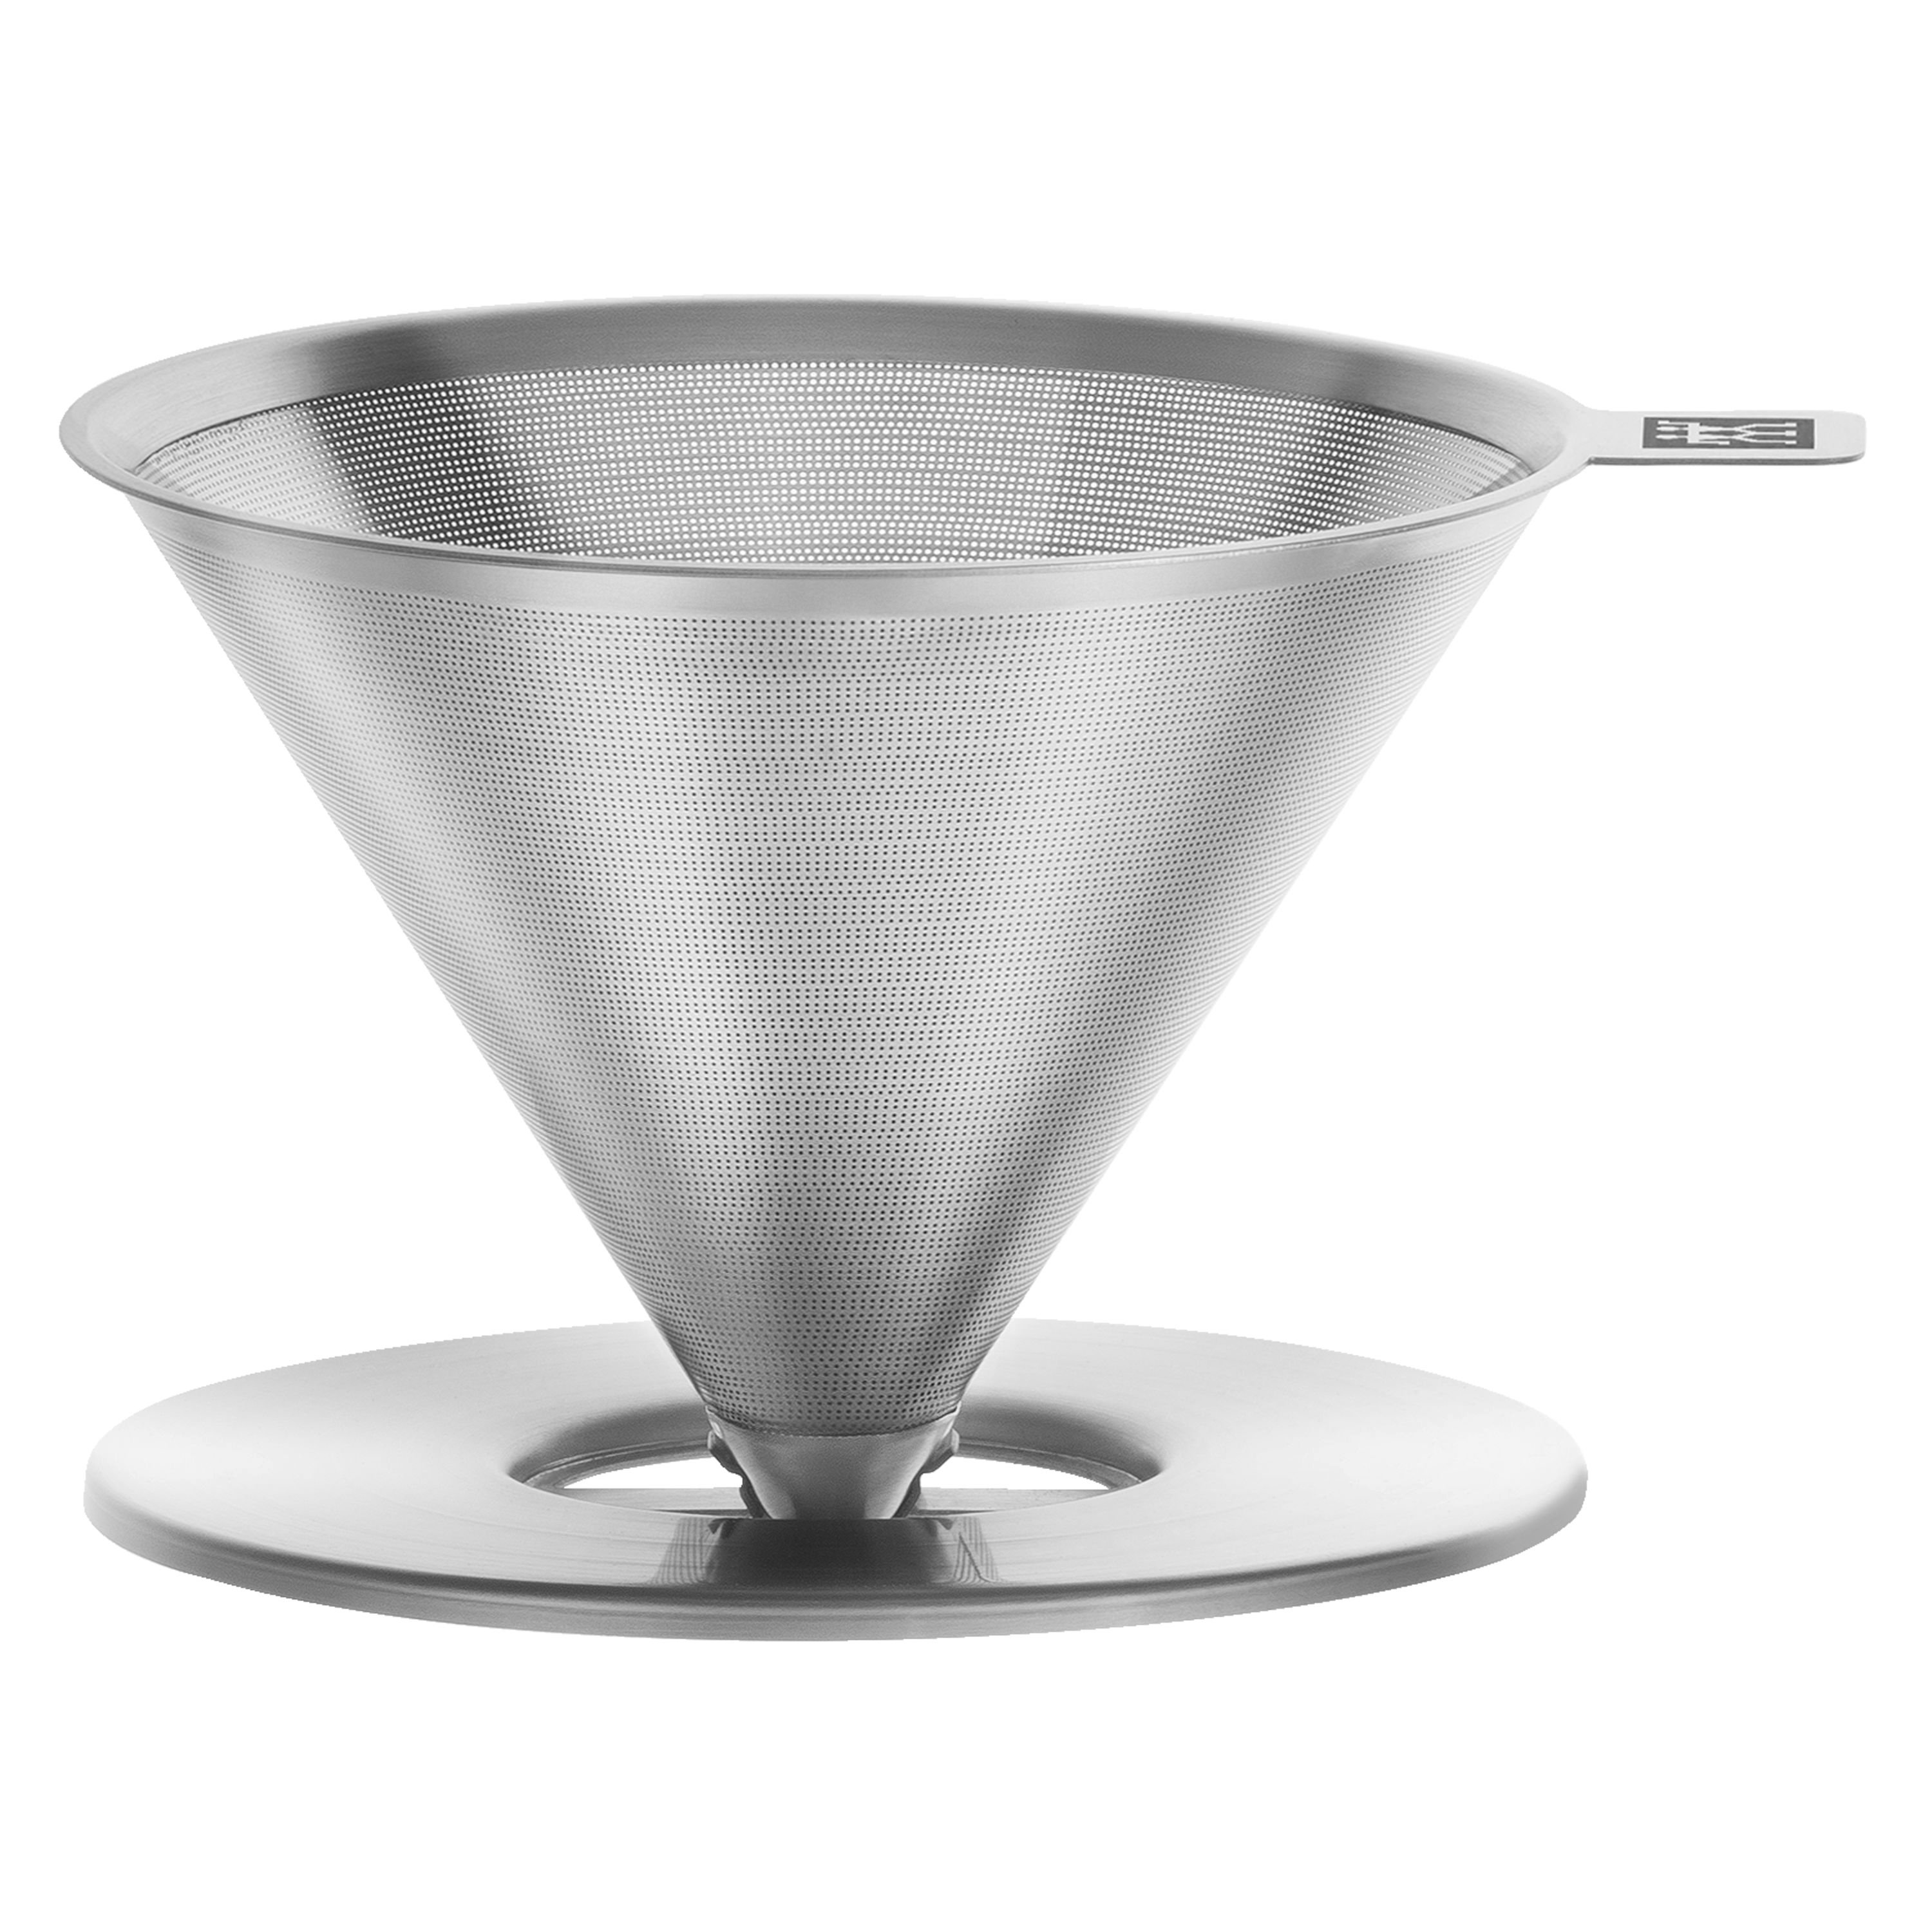 ZWILLING Coffee Pour over coffee dripper, 18/10 Stainless Steel